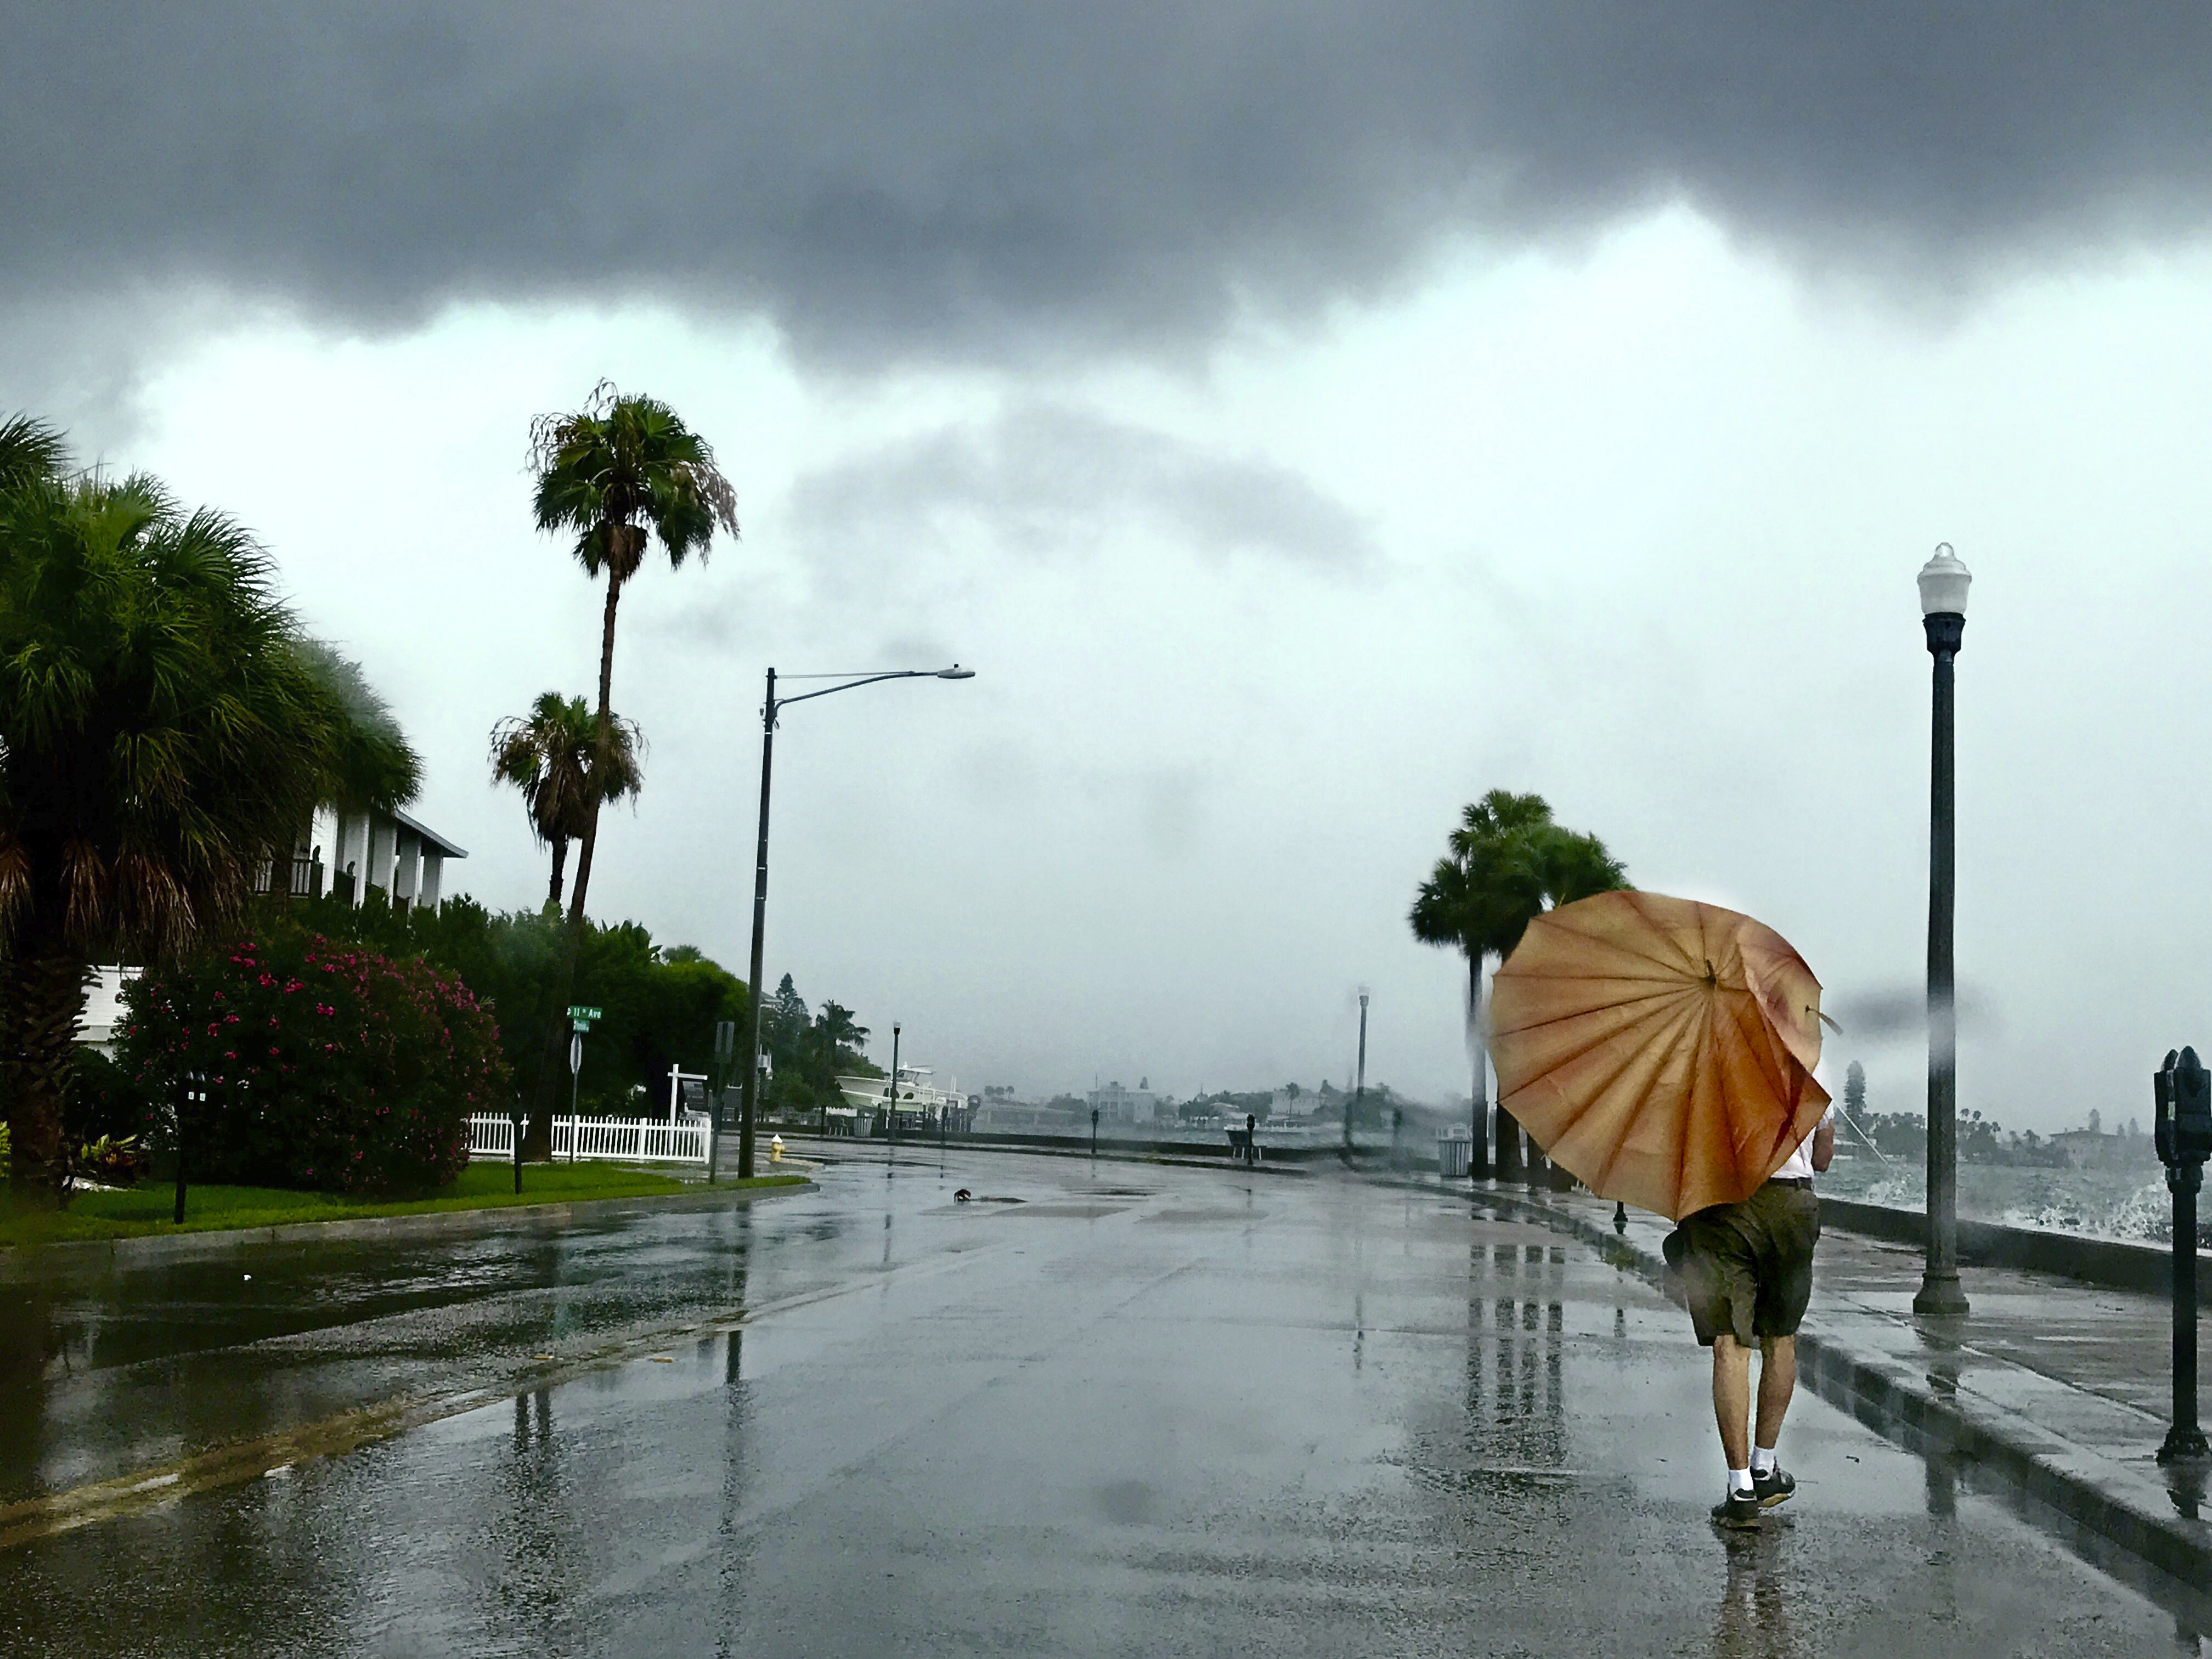 A pedestrian walks along Pass-a-Grille Way, as a rain storm moves over Strong storms move over Pass-a-Grille and St. Pete Beach, Fla., Wednesday, June 7, 2017. Wednesday brought more wet weather to the area. (Scott Keeler/Tampa Bay Times via AP)